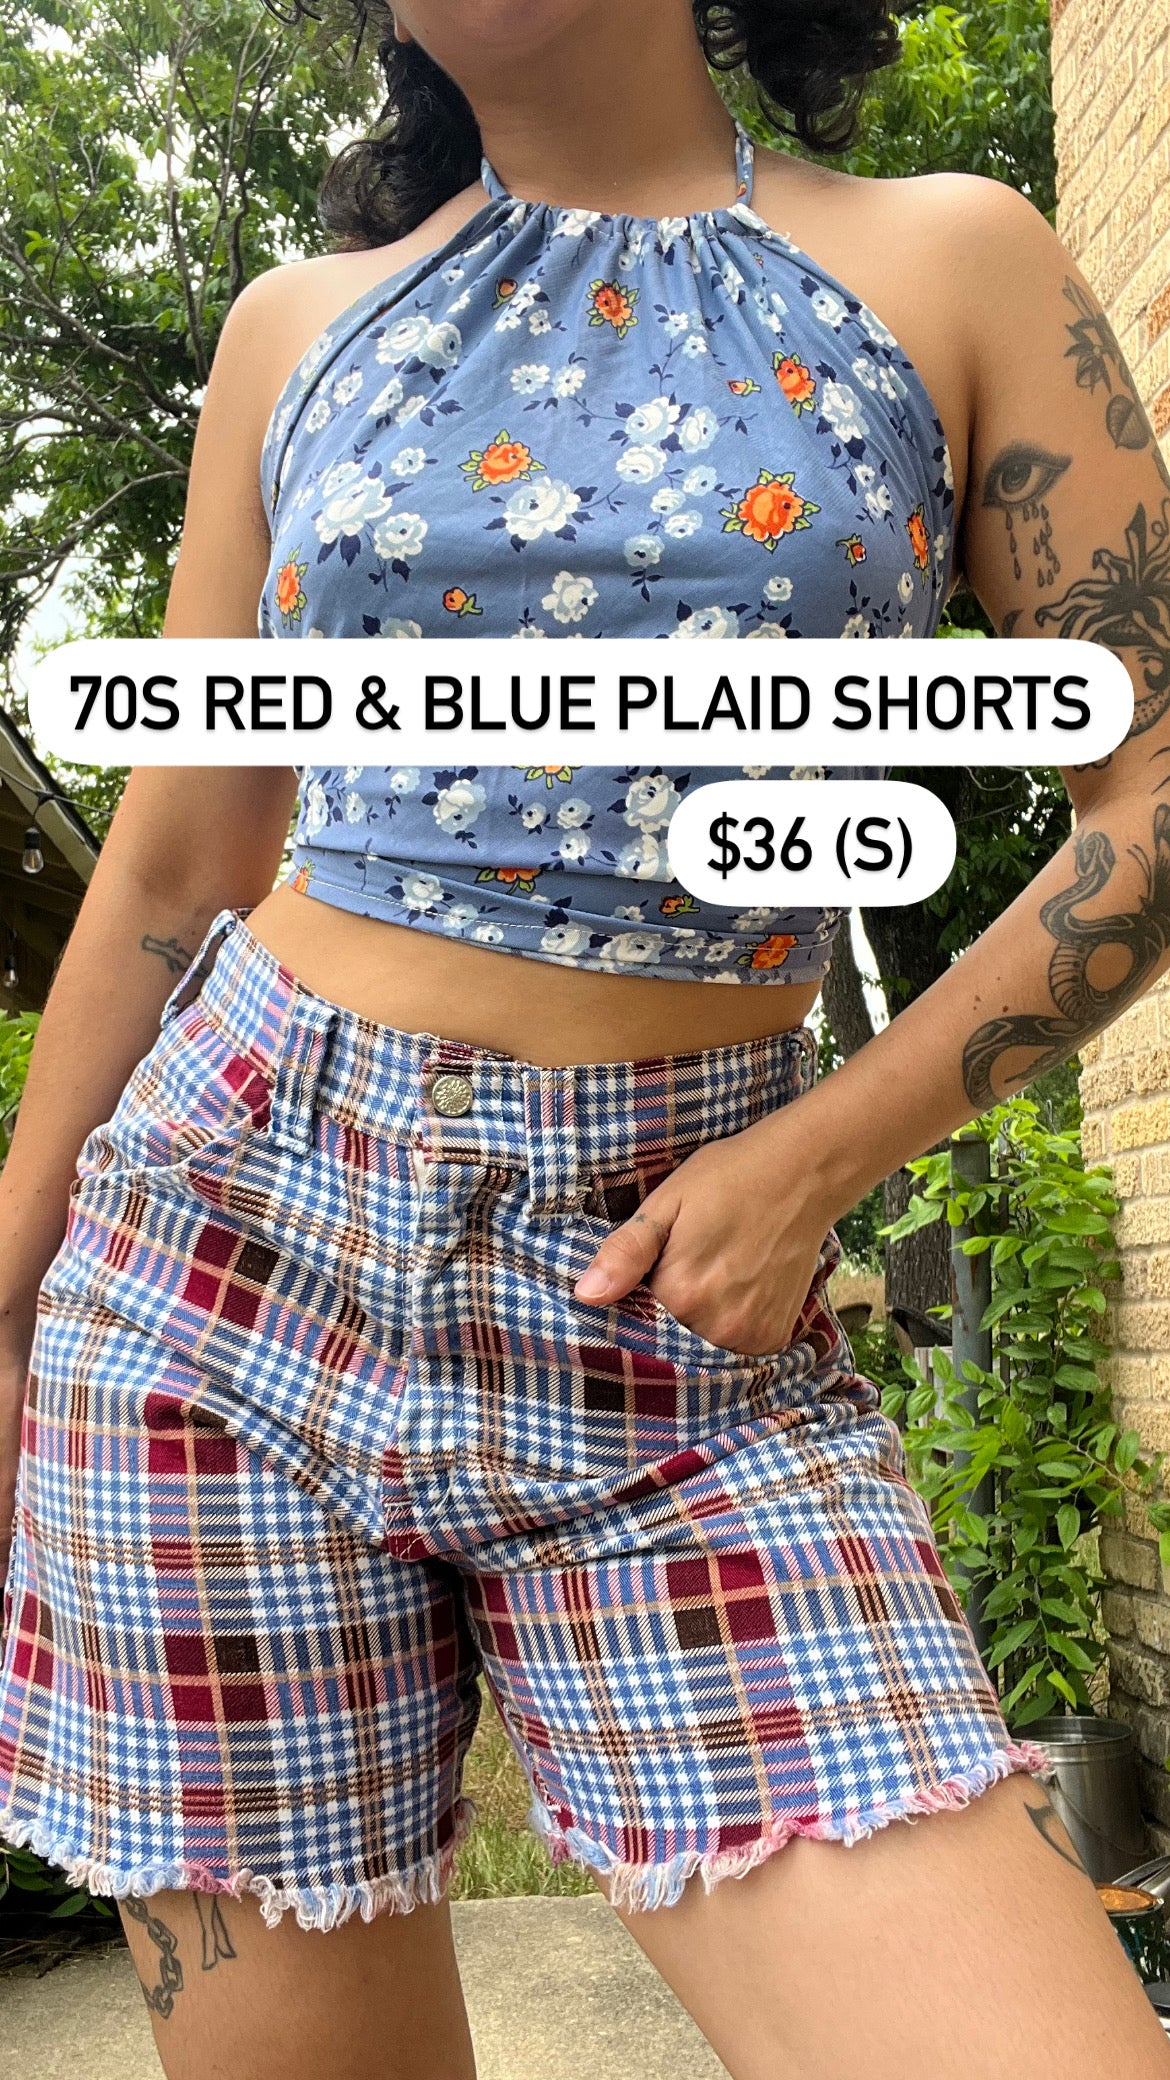 70s red & blue plaid shorts for emilia